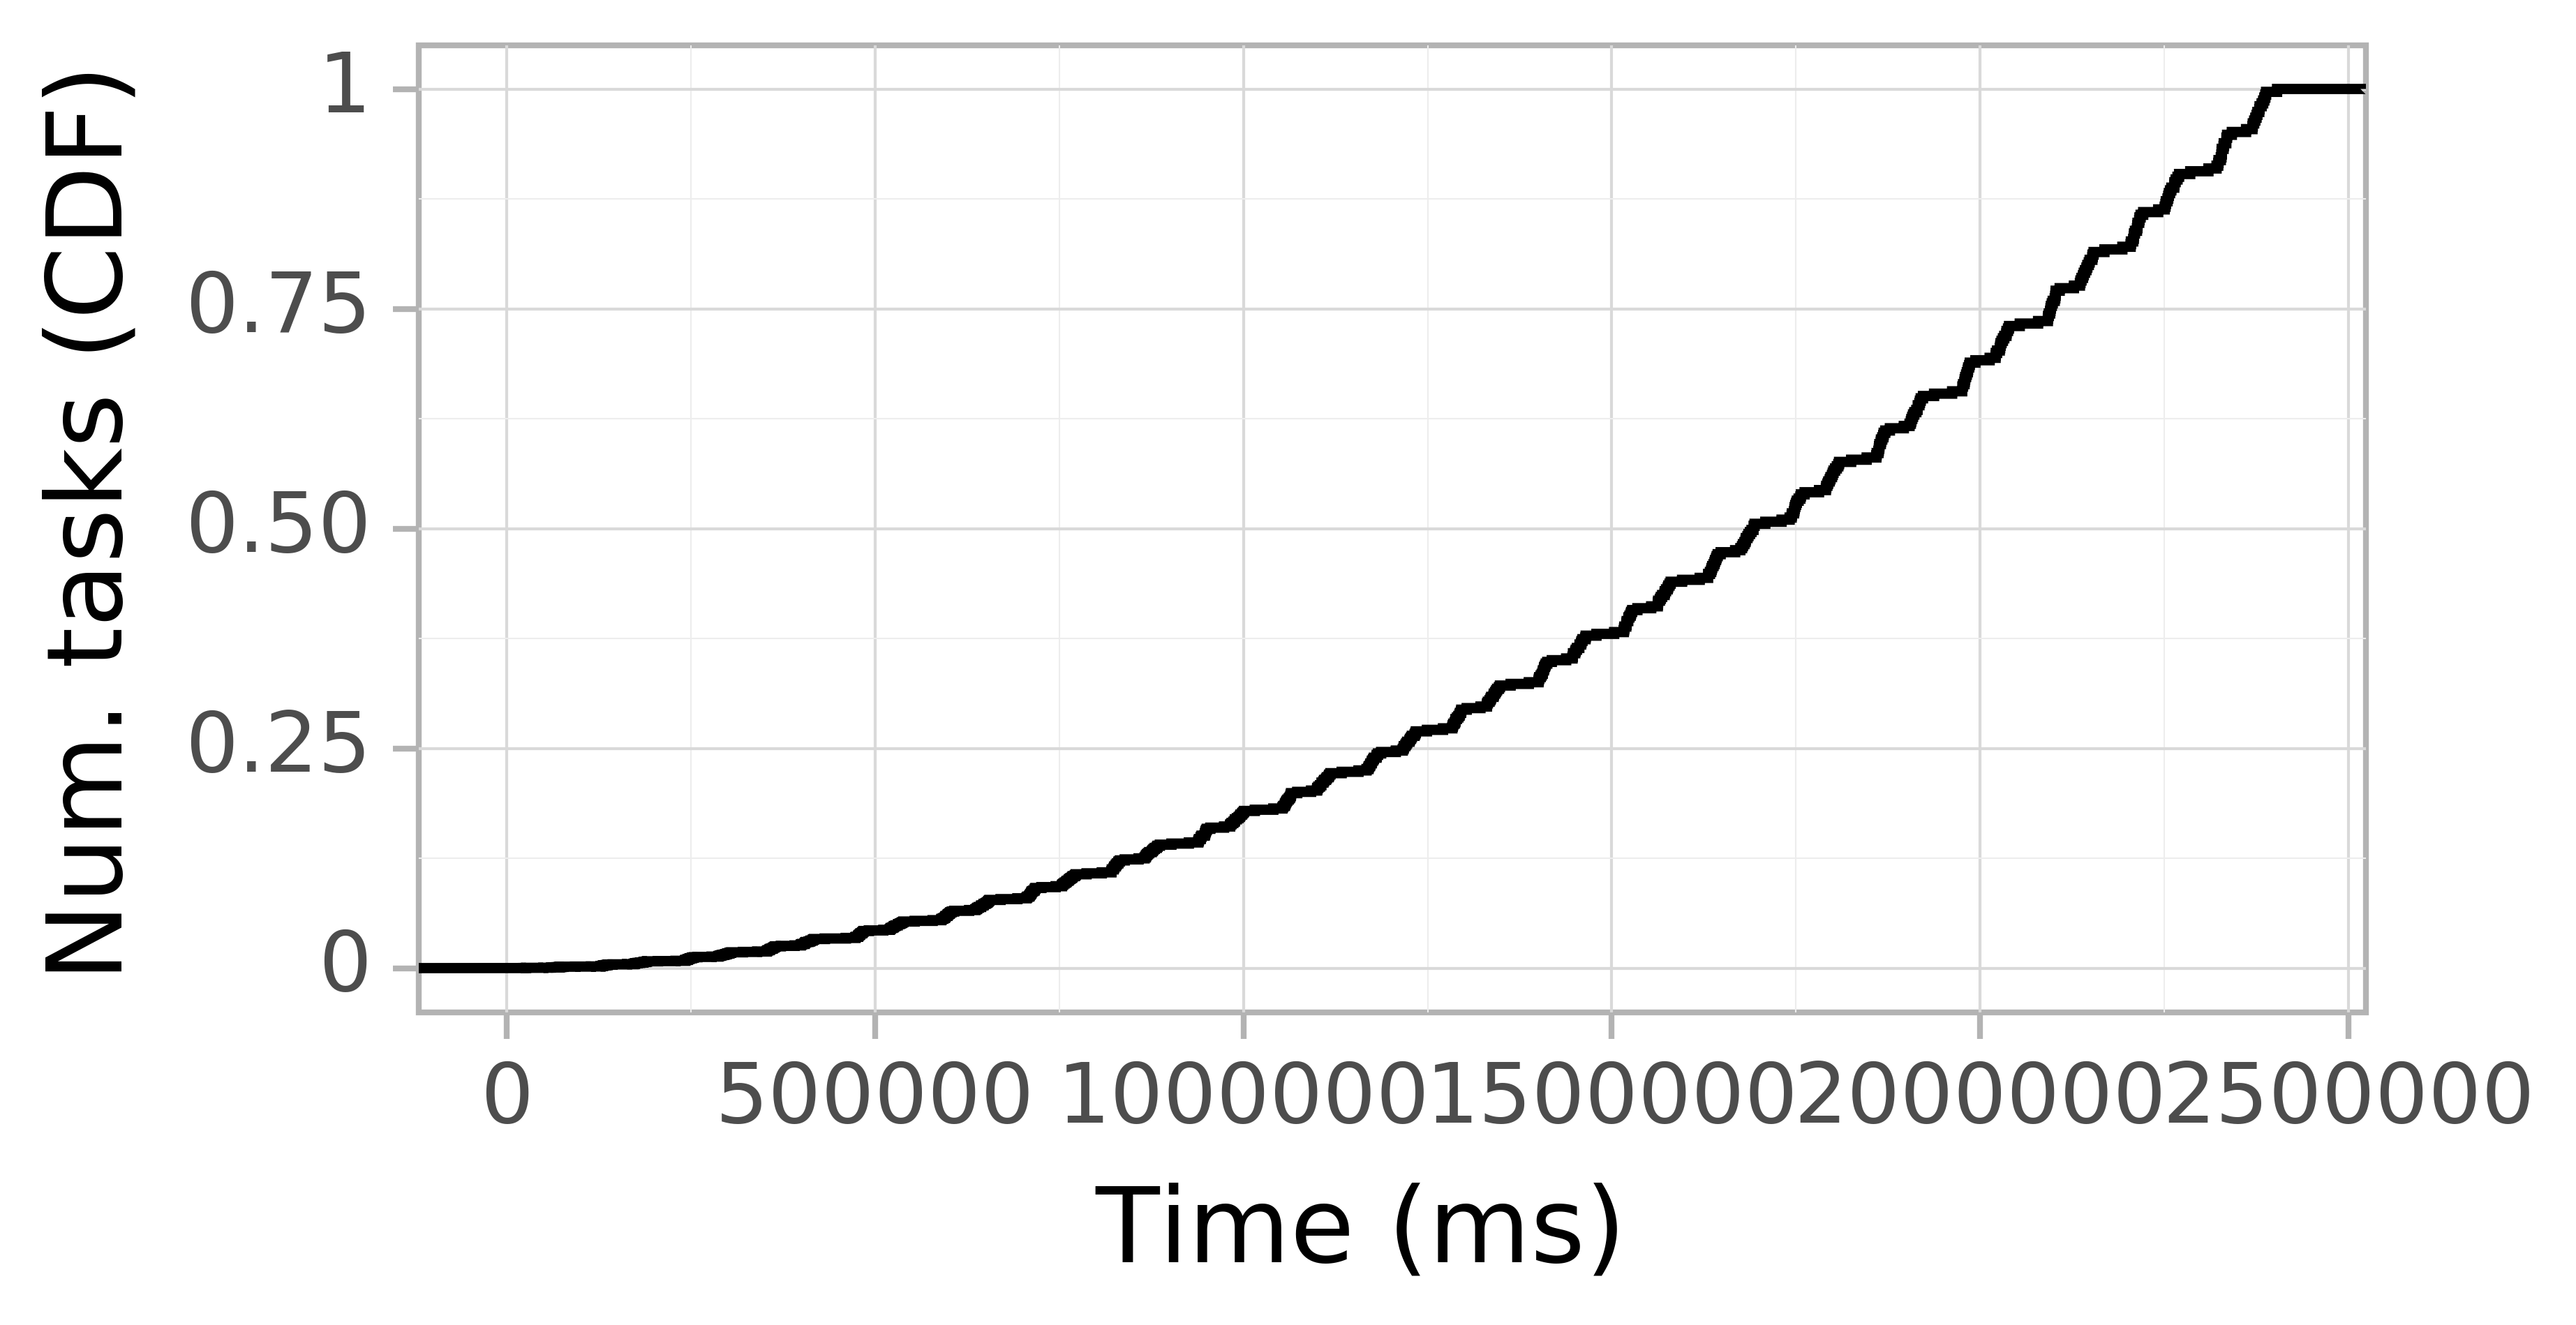 Task arrival CDF graph for the askalon-new_ee13 trace.